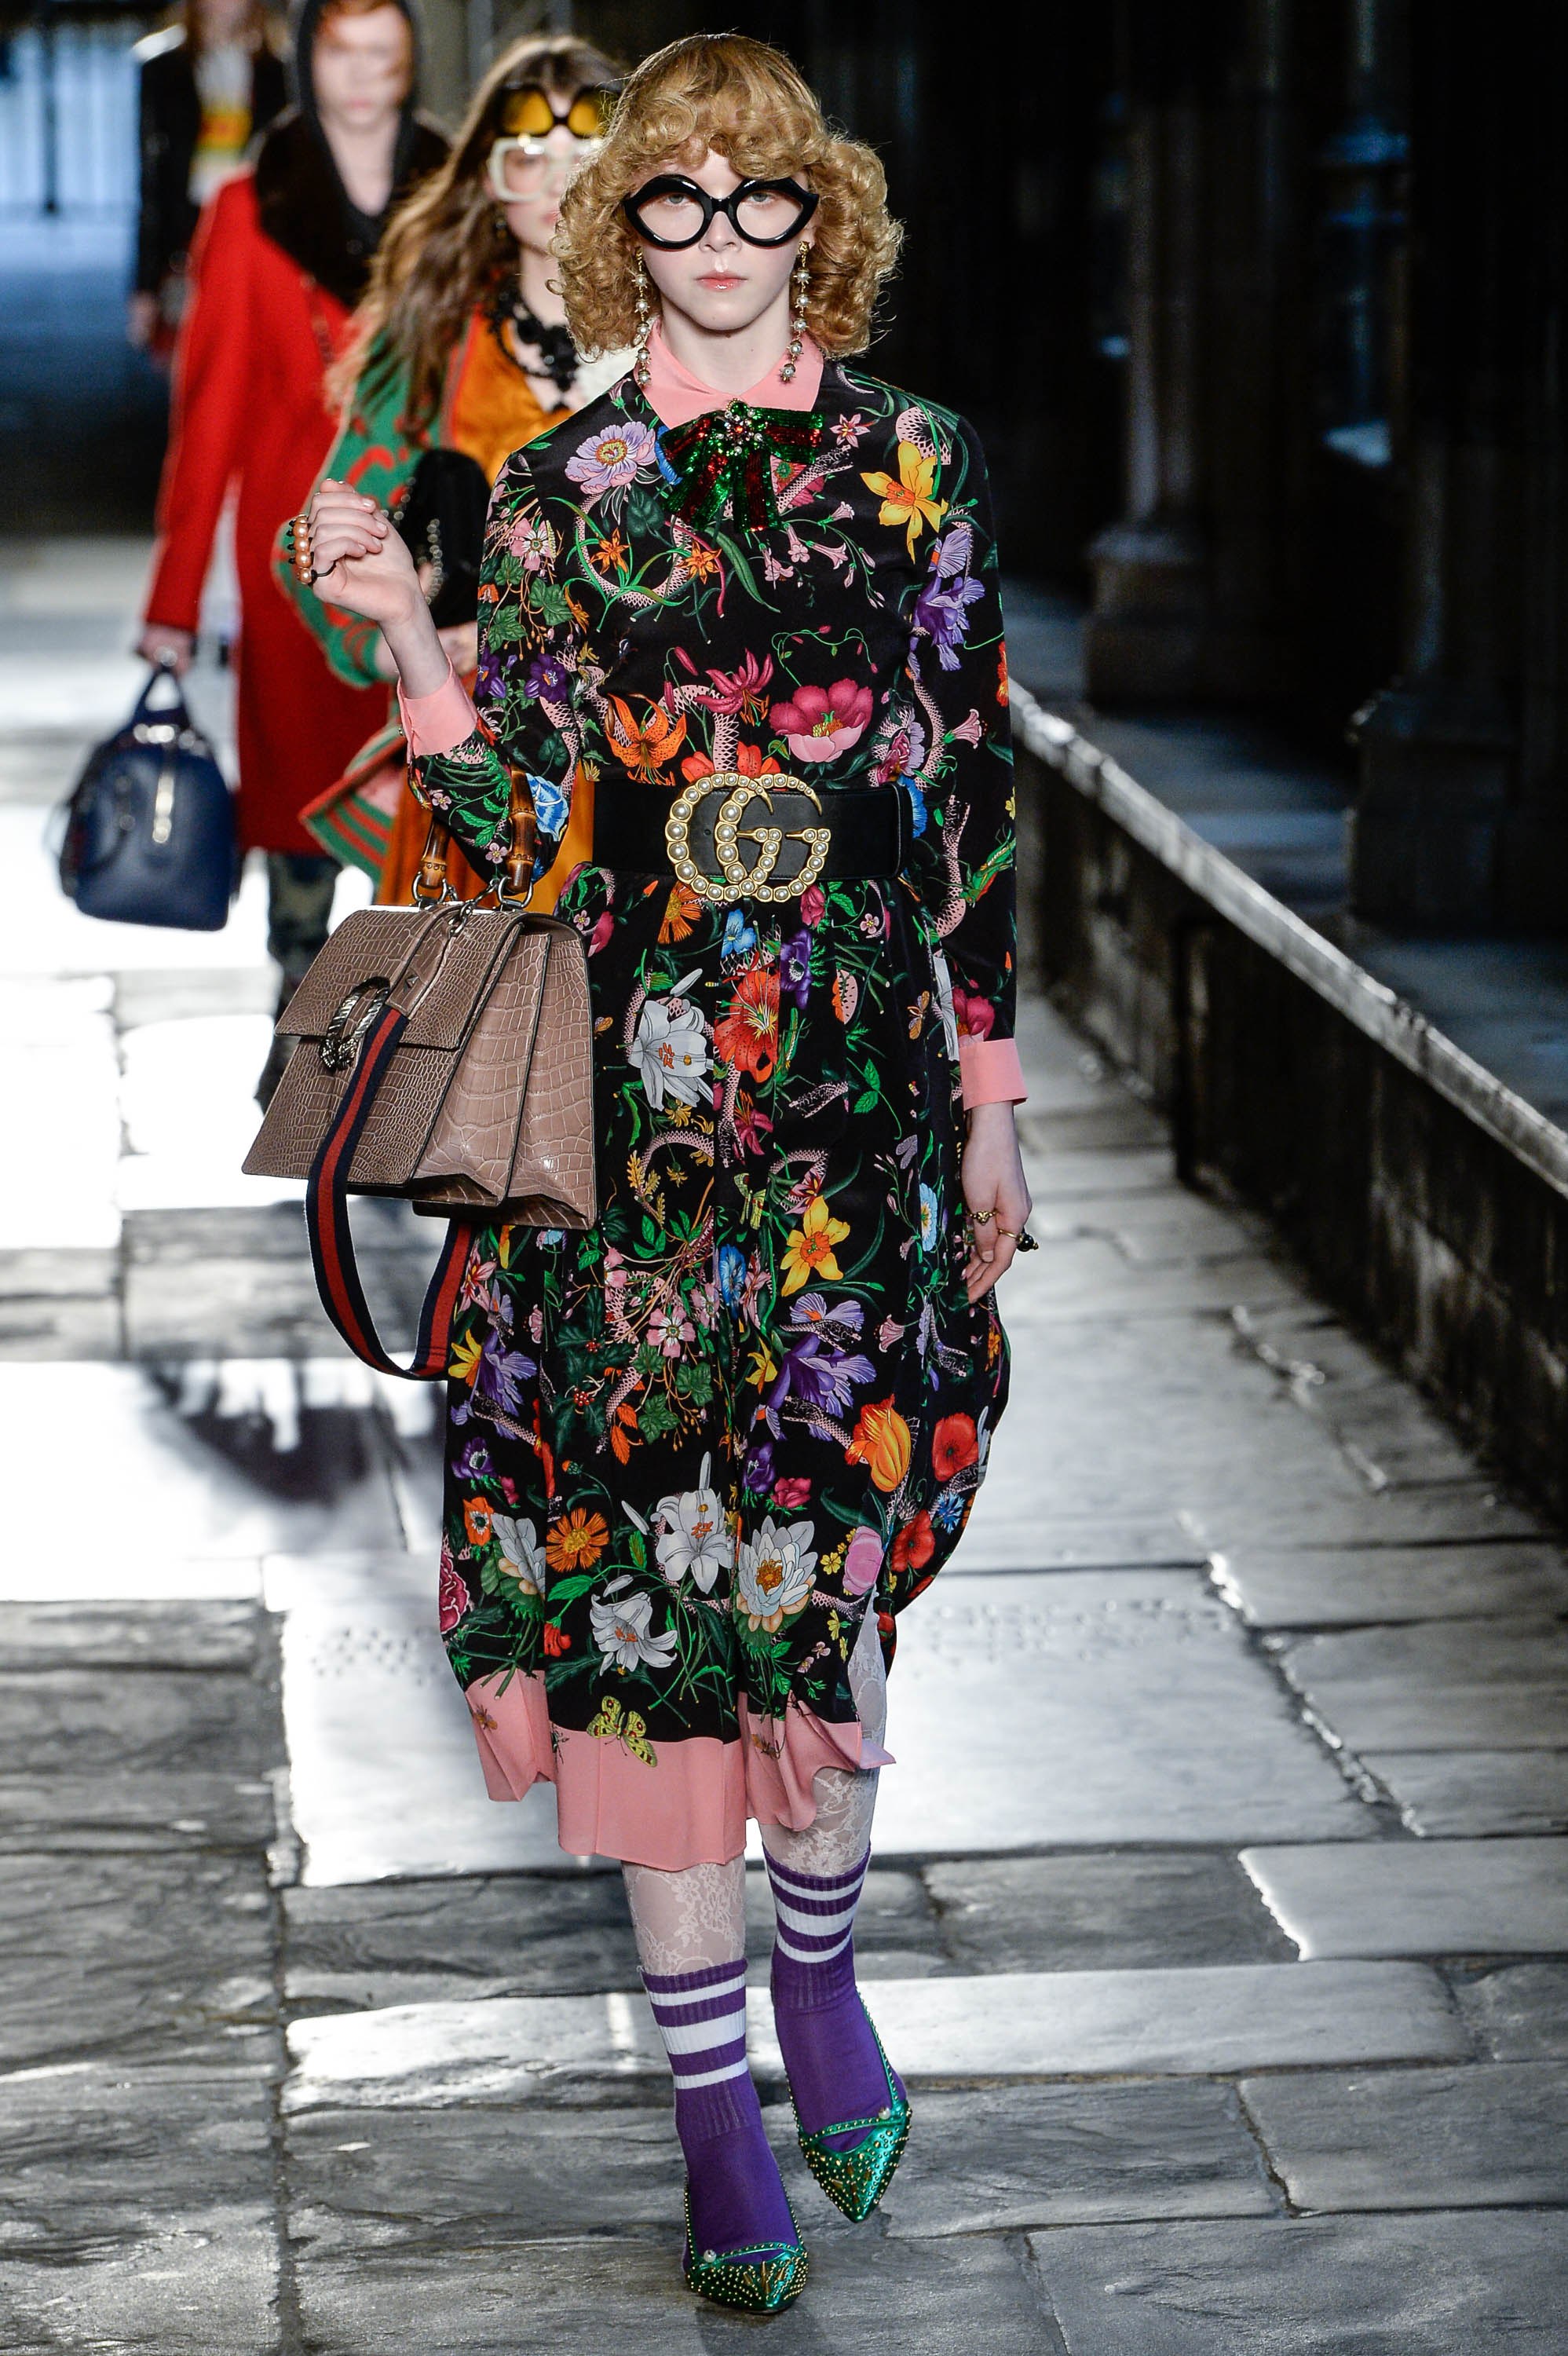 Gucci Resort 2017 Collection shown at Westminster Abbey, June 2016